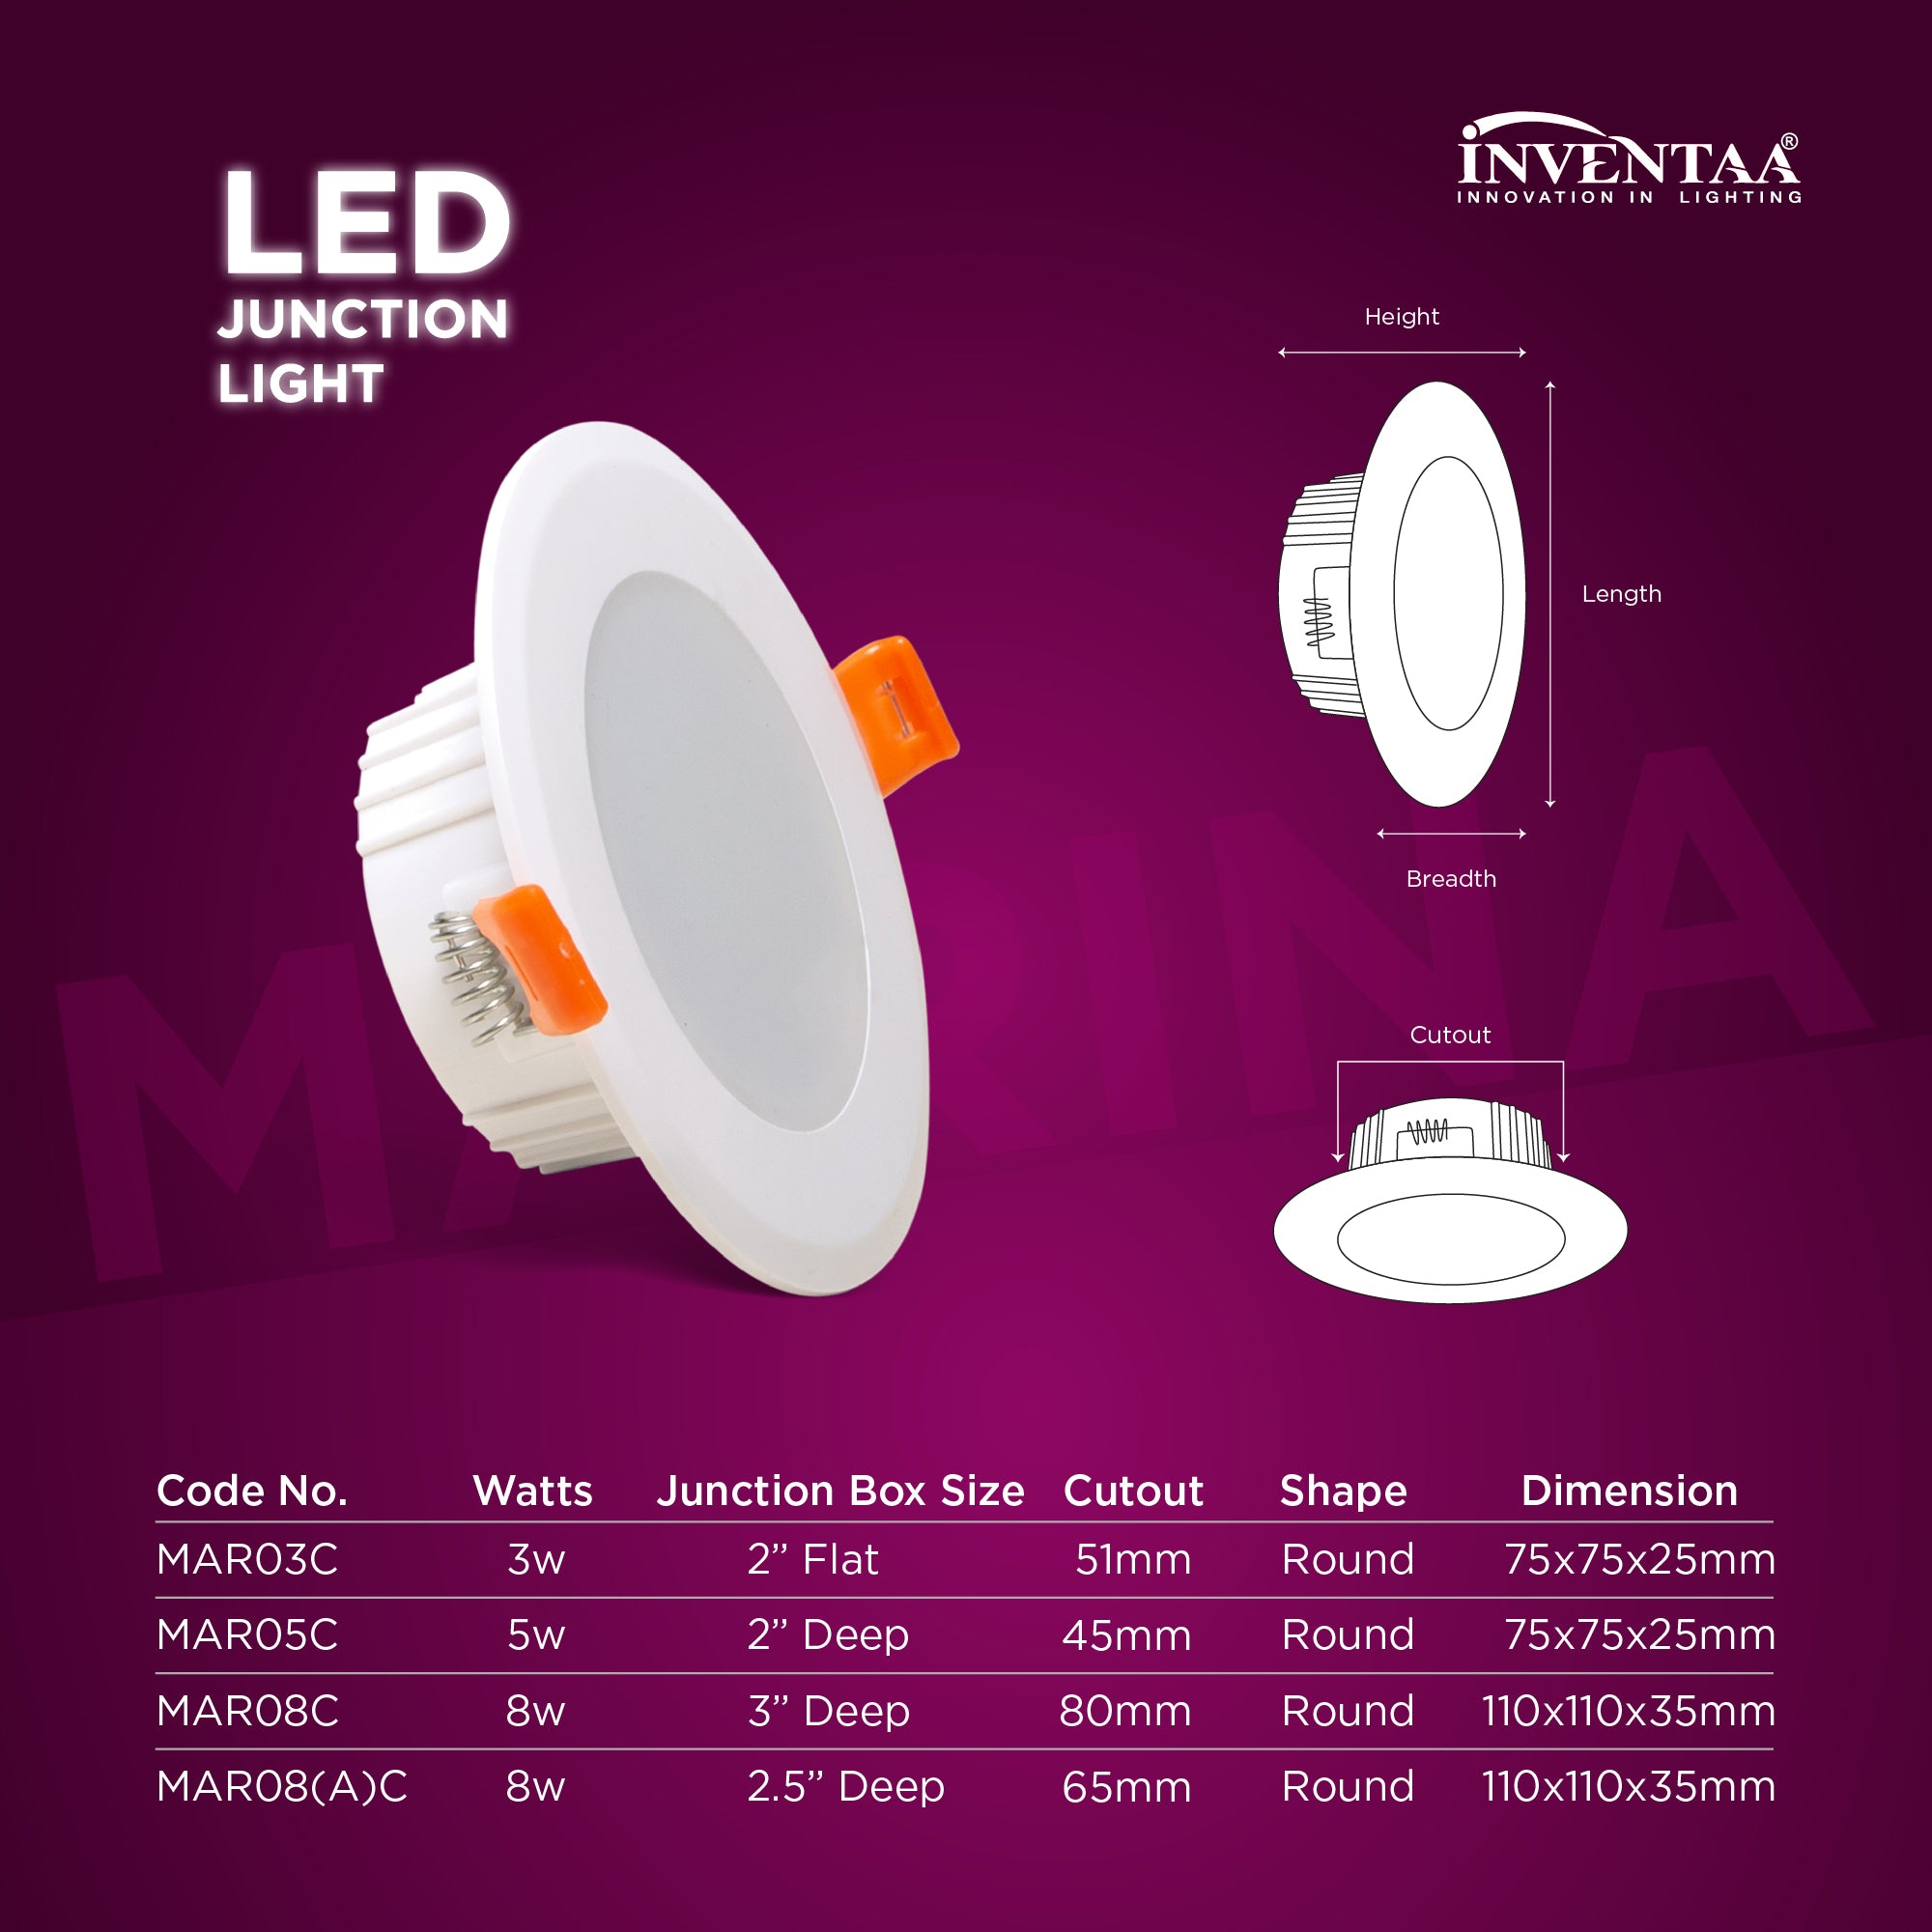 Dimension Of Marina 8W LED Junction Light #Suitable For_2.5 inch Deep Junction Box